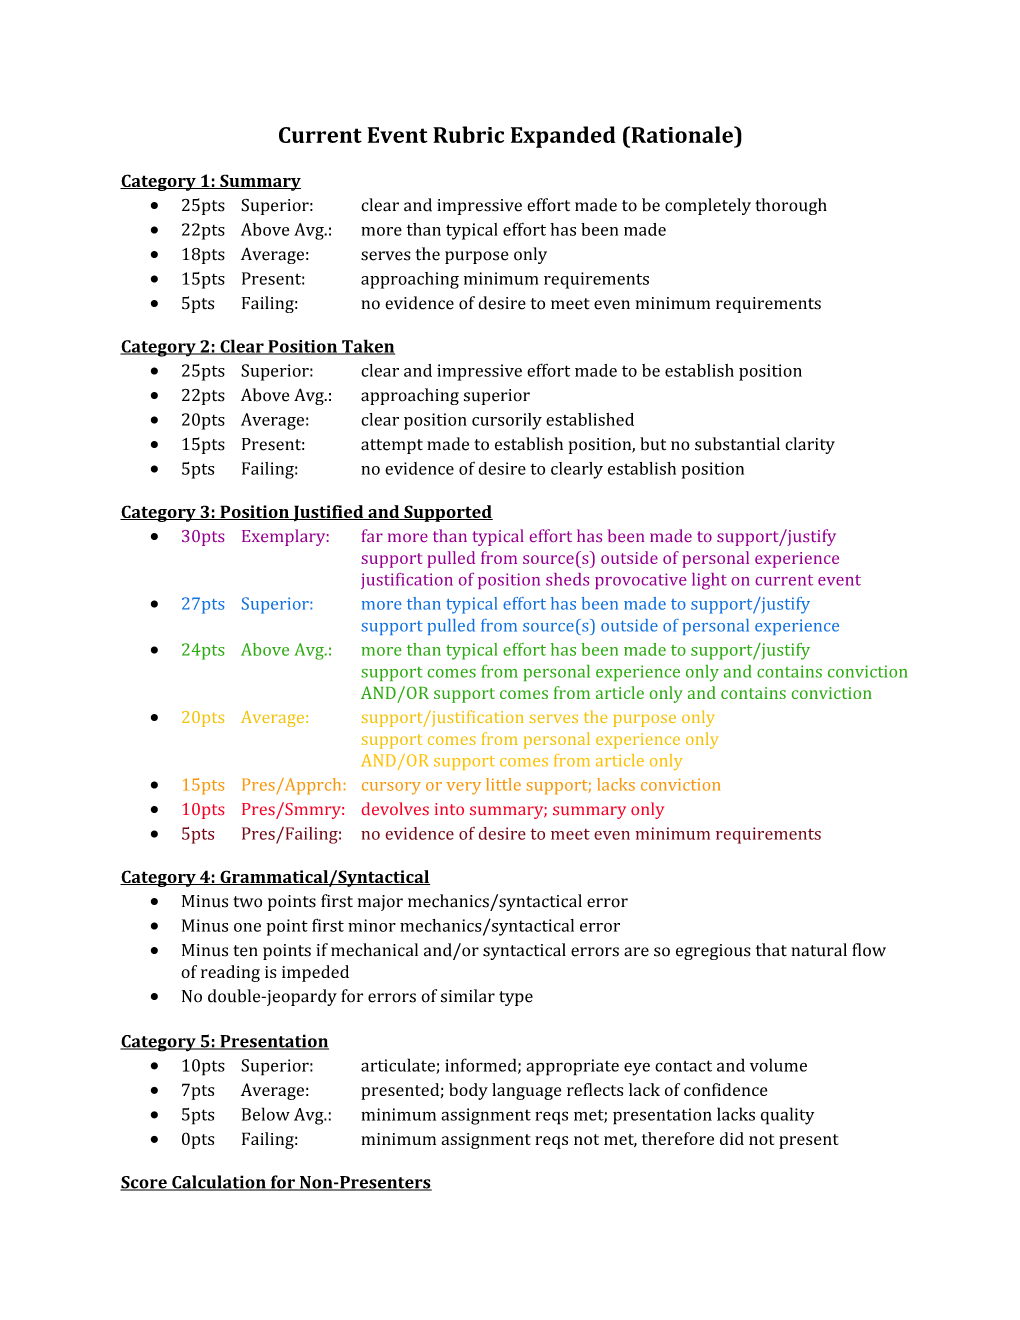 Current Event Rubric Expanded (Rationale)